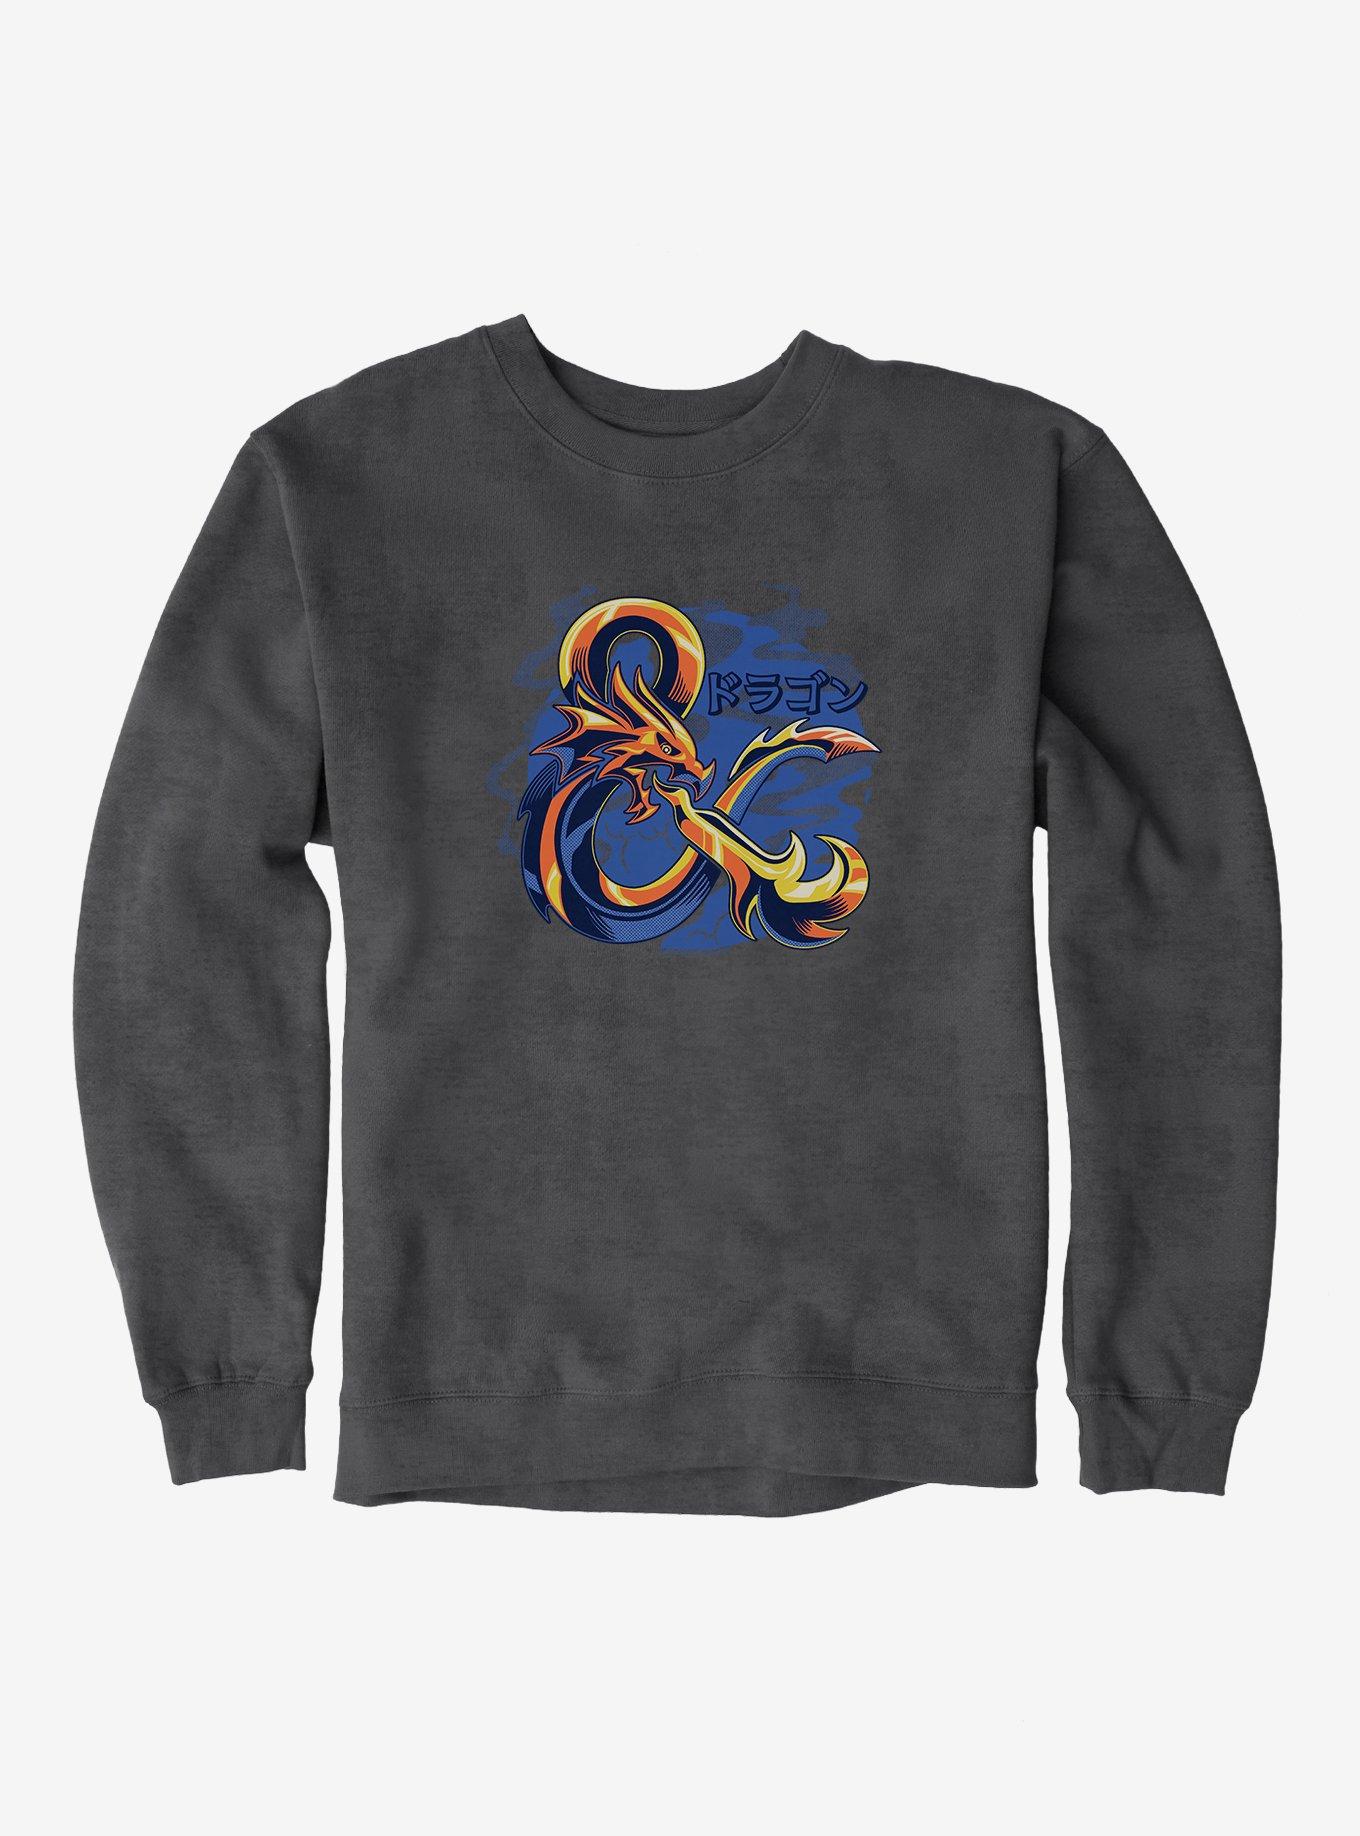 Dungeons & Dragons Gold Ampersand Asian Letters Sweatshirt